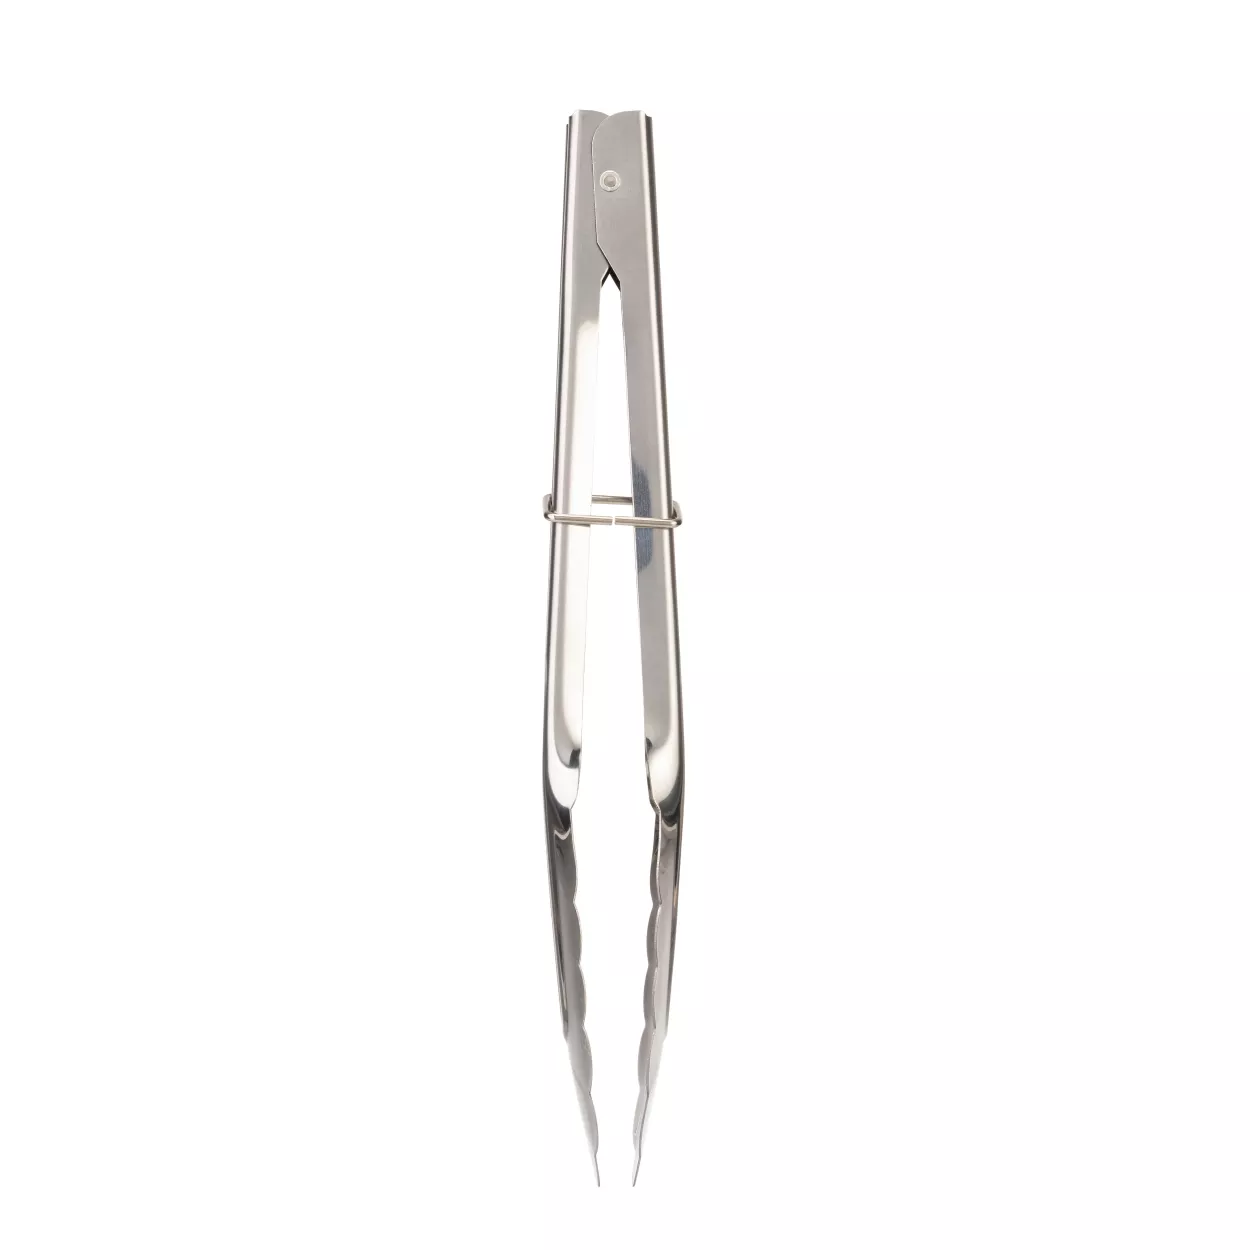 Just The Thing 23cm Stainless Steel Kitchen Tongs